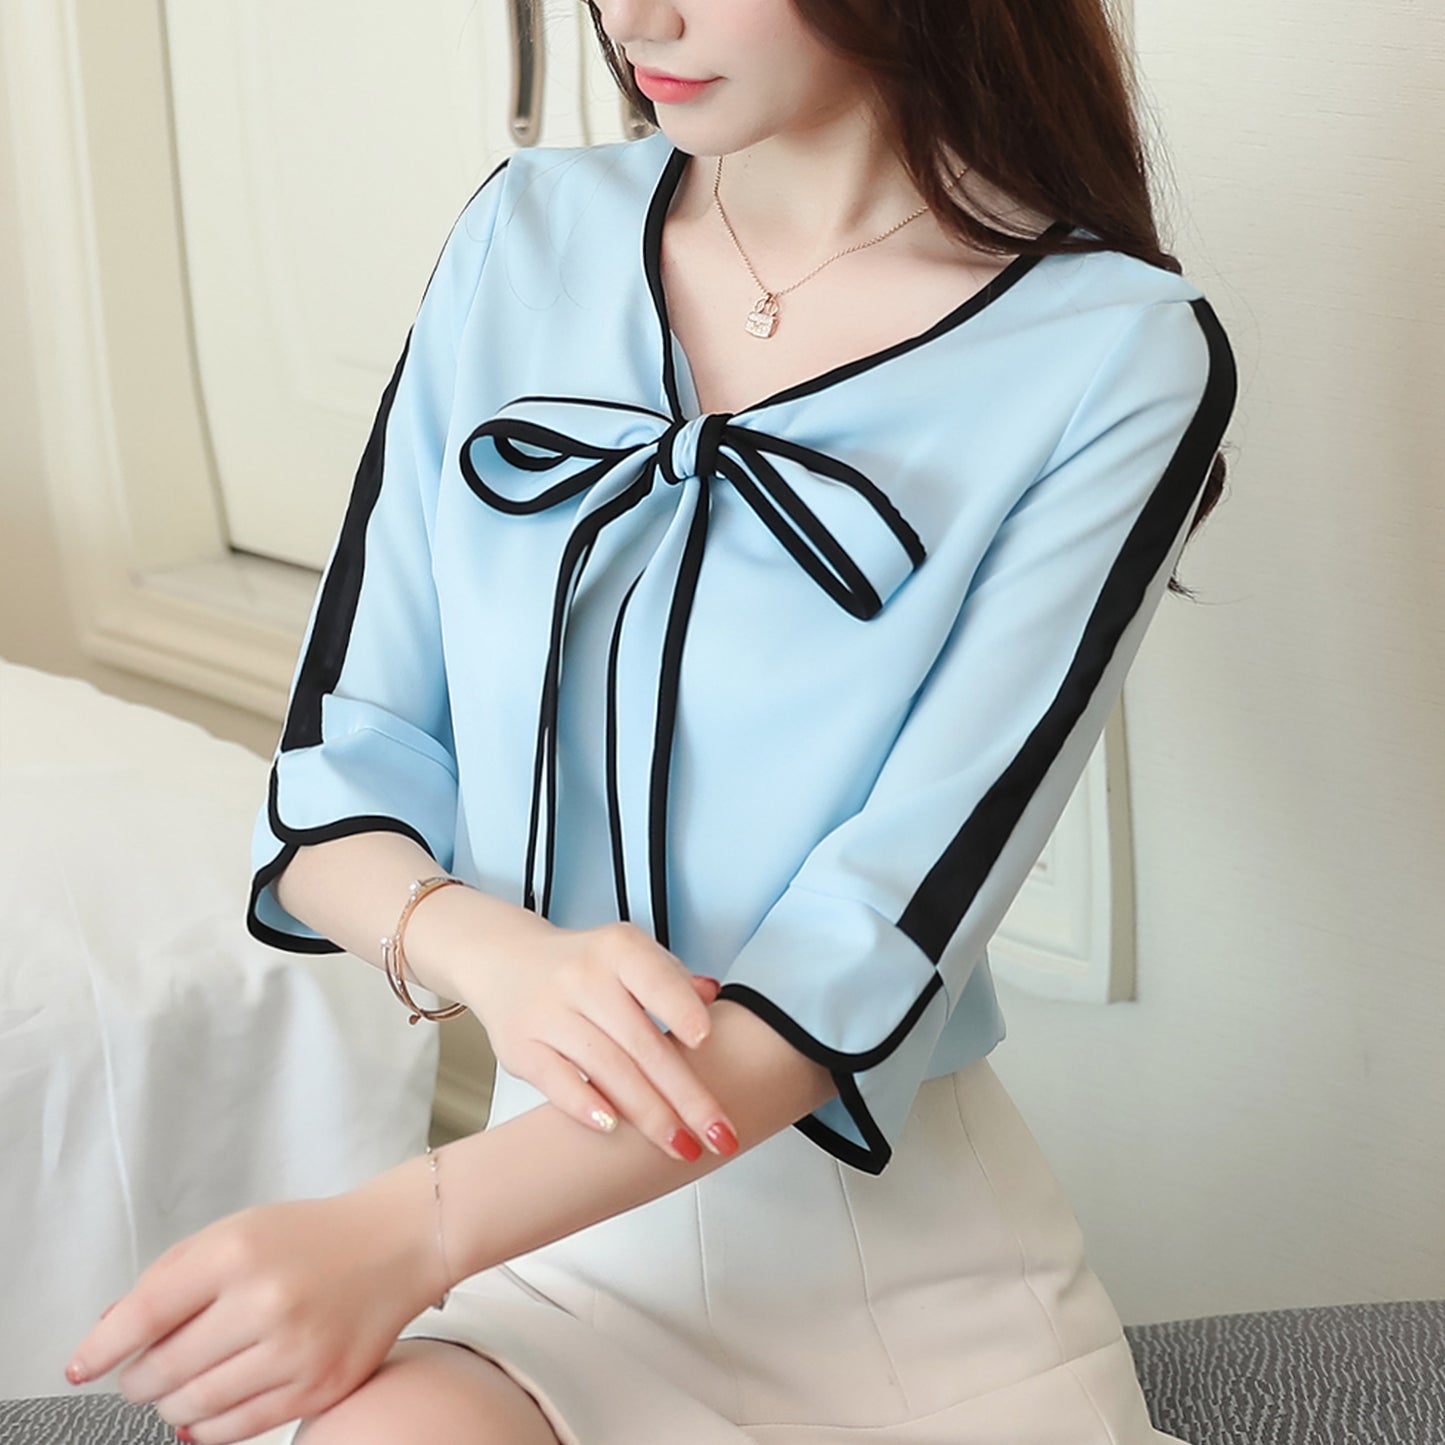 Tie Bow Solid Color Short Sleeve Button-Down Shirt Blouse